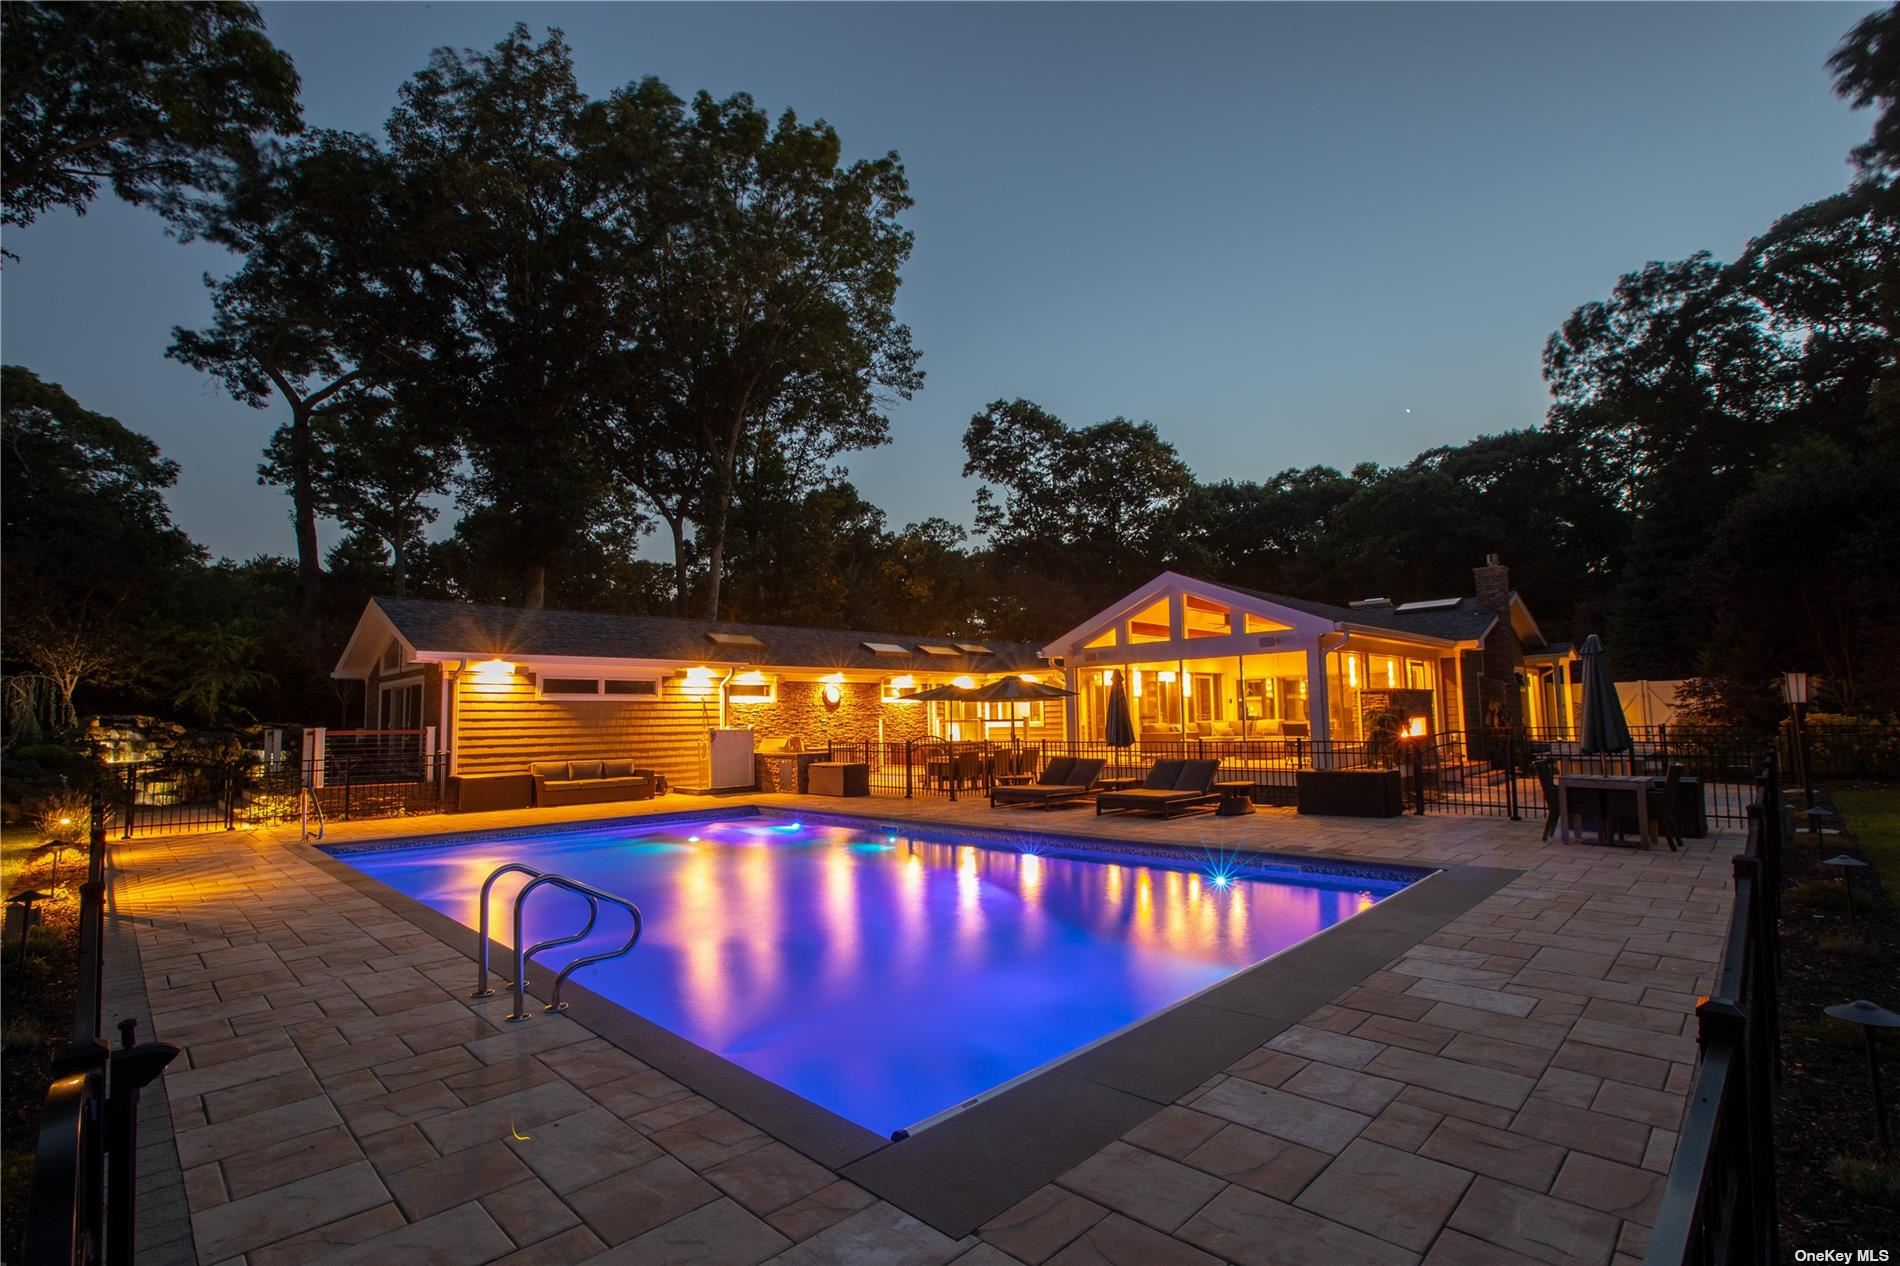 Property for Sale at 49 Branch Drive, Smithtown, Hamptons, NY - Bedrooms: 4 
Bathrooms: 4  - $1,950,000